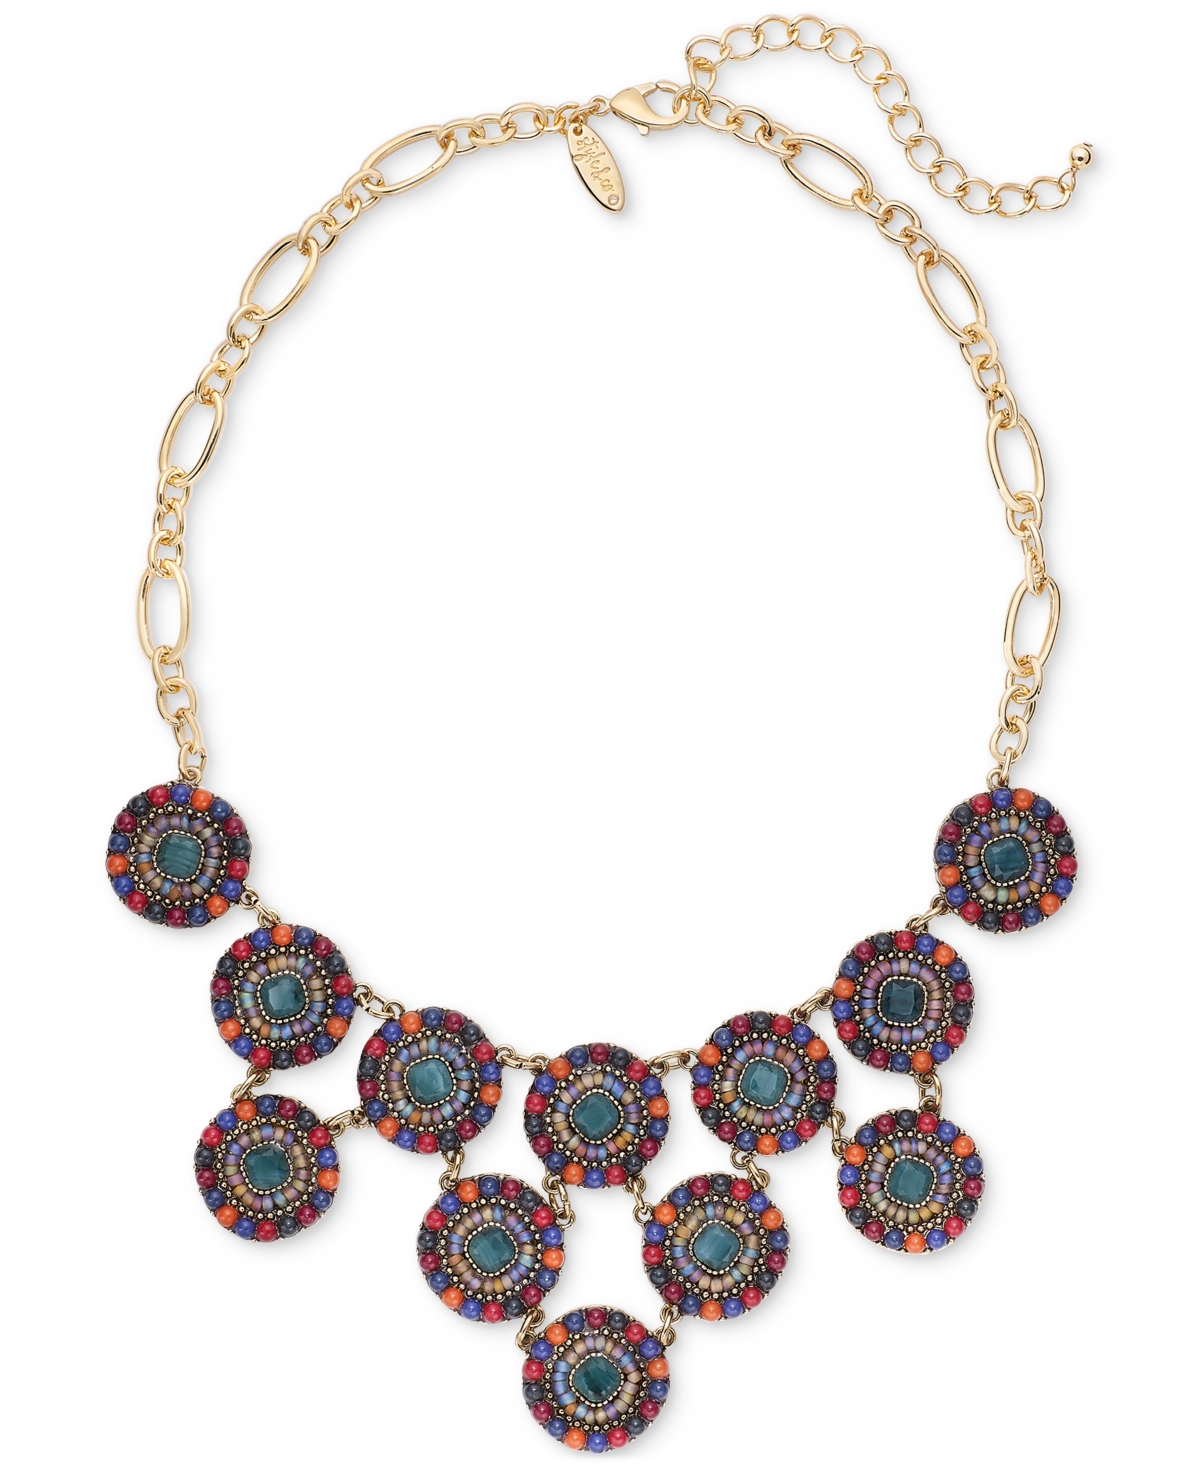 Style & Co Beaded Circle Statement Necklace, 17" + 3" Extender, Created For Macy's In Multi